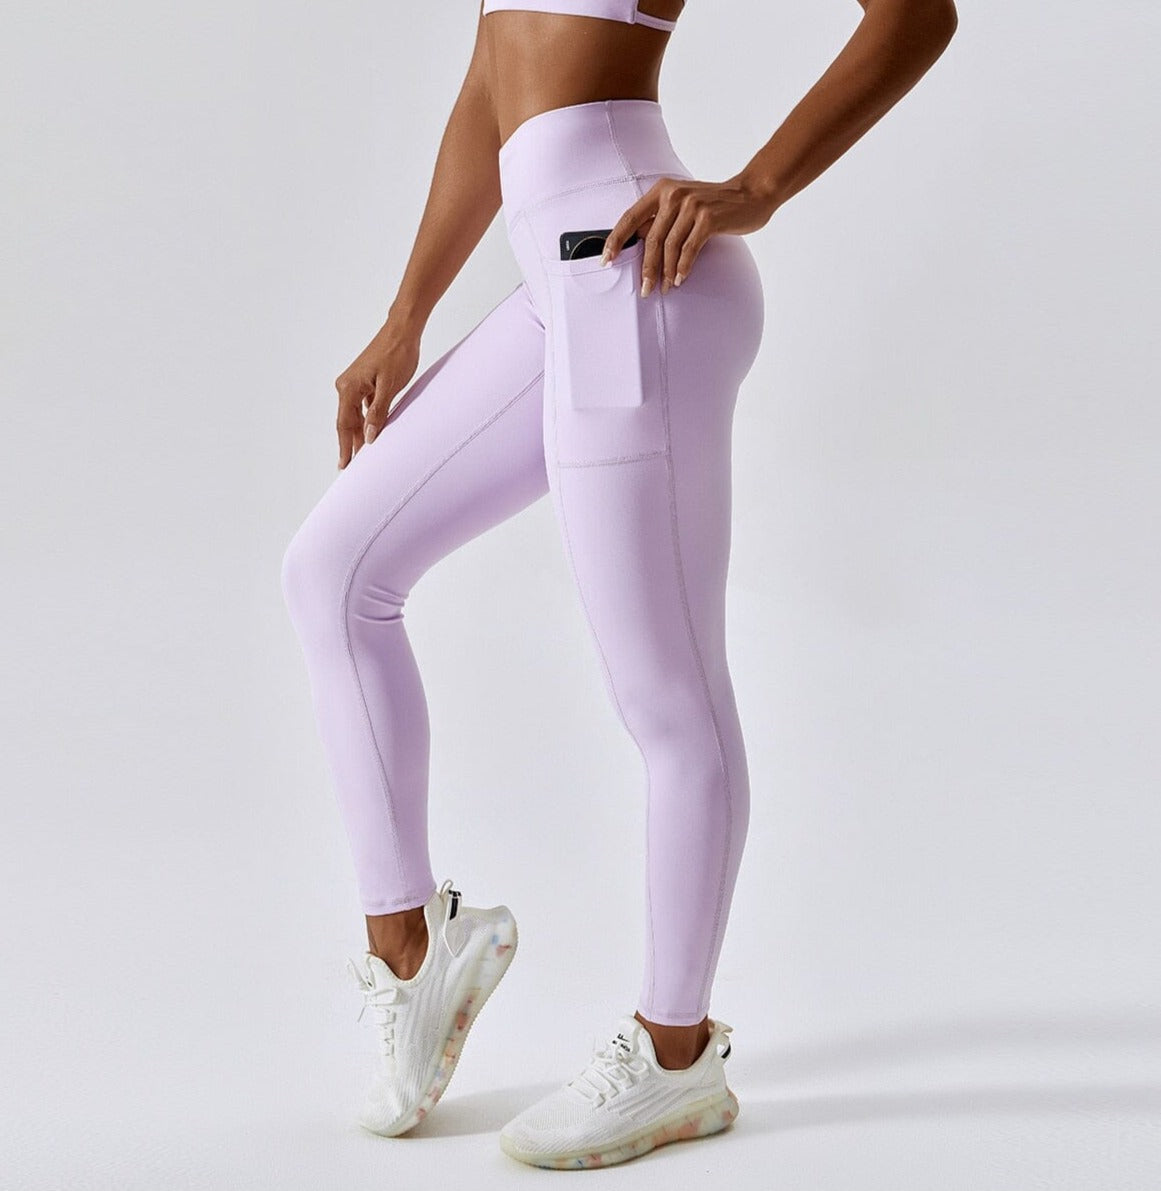 NCLAGEN 2021 Spring Yoga Pants Gym Double Side Running No Camel Toe Tight  High Waist Sport Workout Quick Dry Female Naked Feel